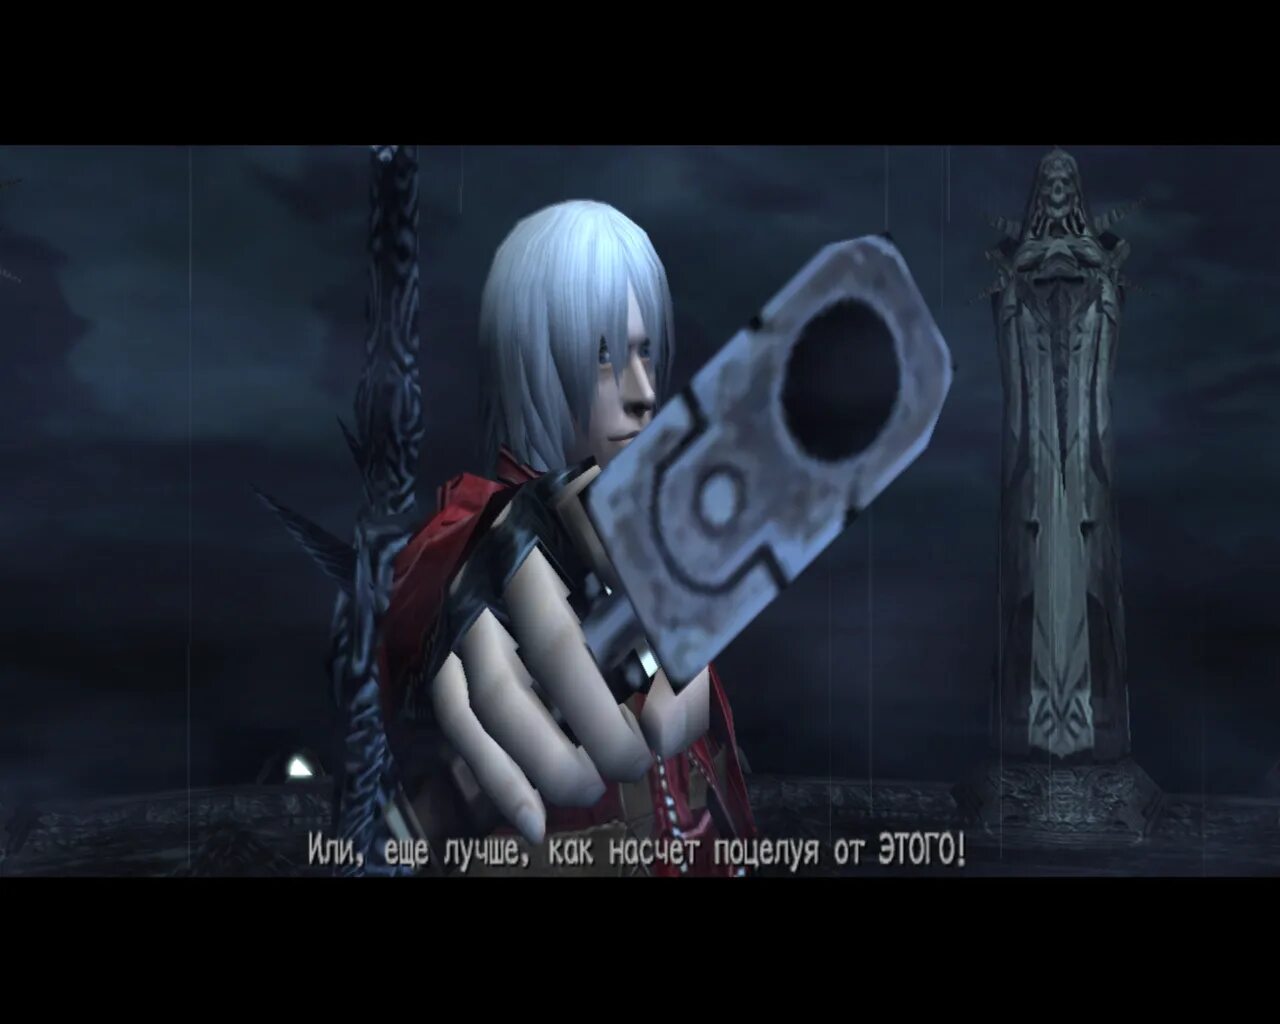 Devil may cry collection русификатор. DMC 3 русификатор. Фразы из DMC. Devil May Cry фраза.